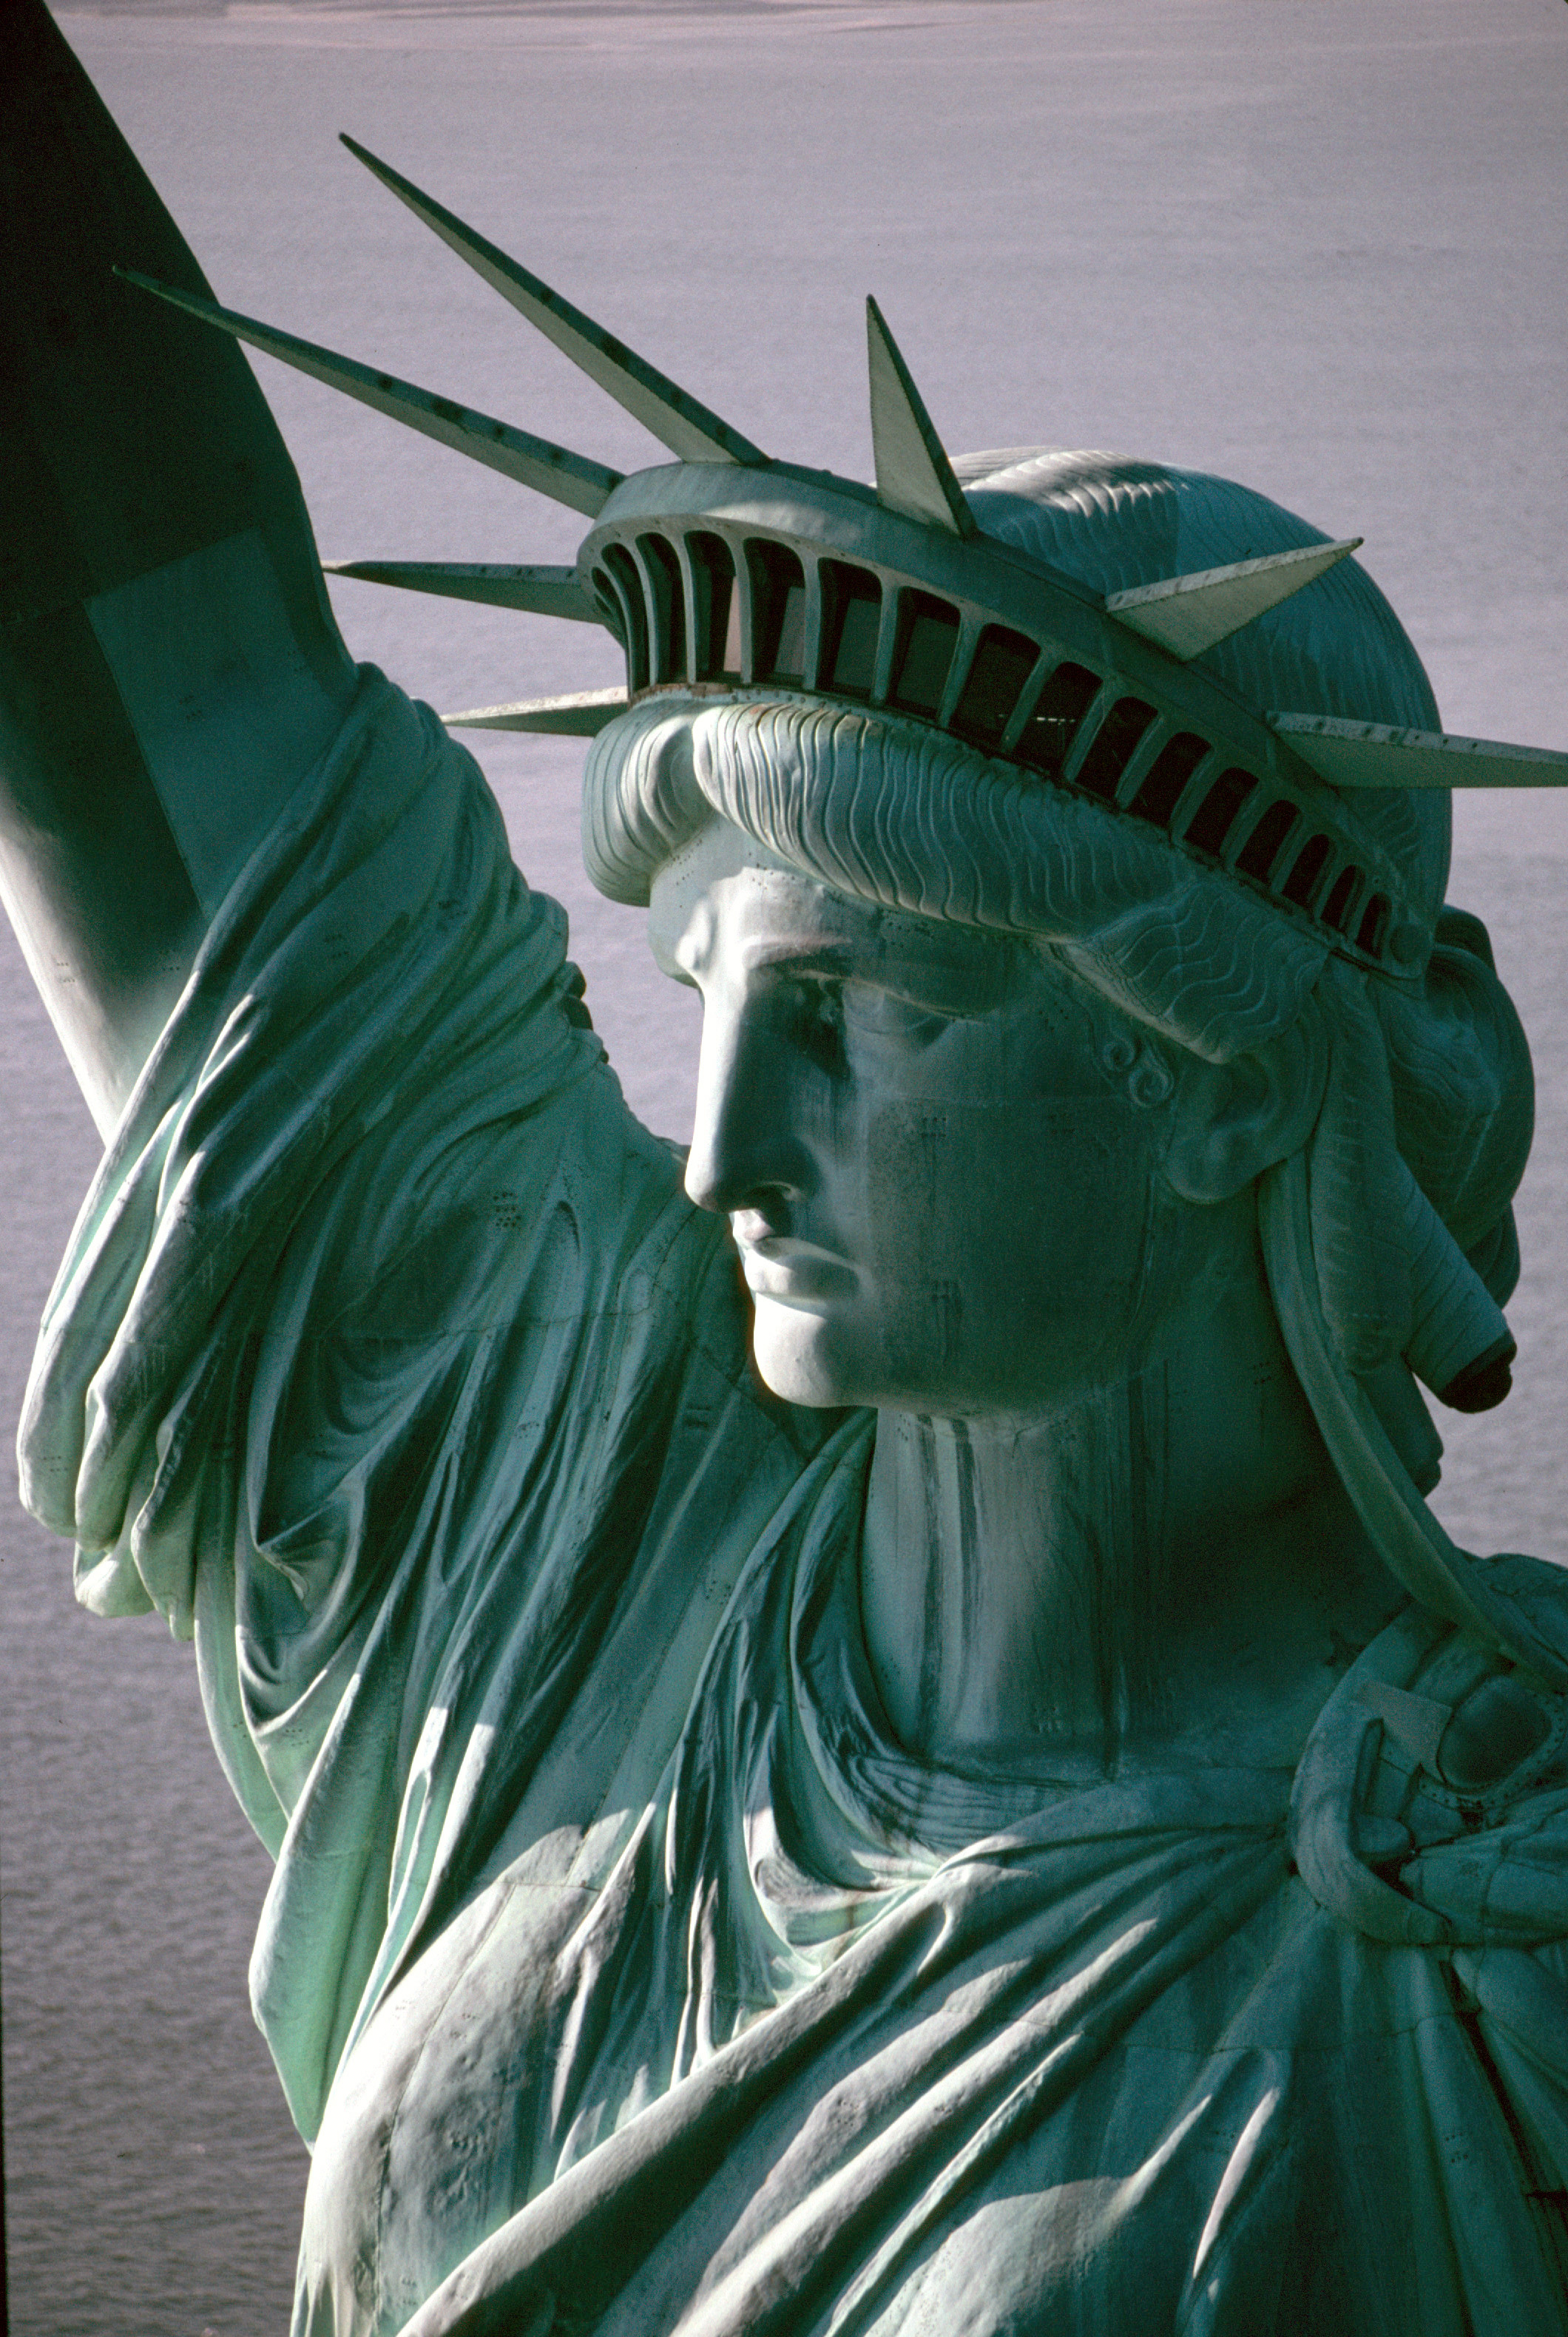 Close-up of the Statue of Liberty's head, crown, and the folds of her robe